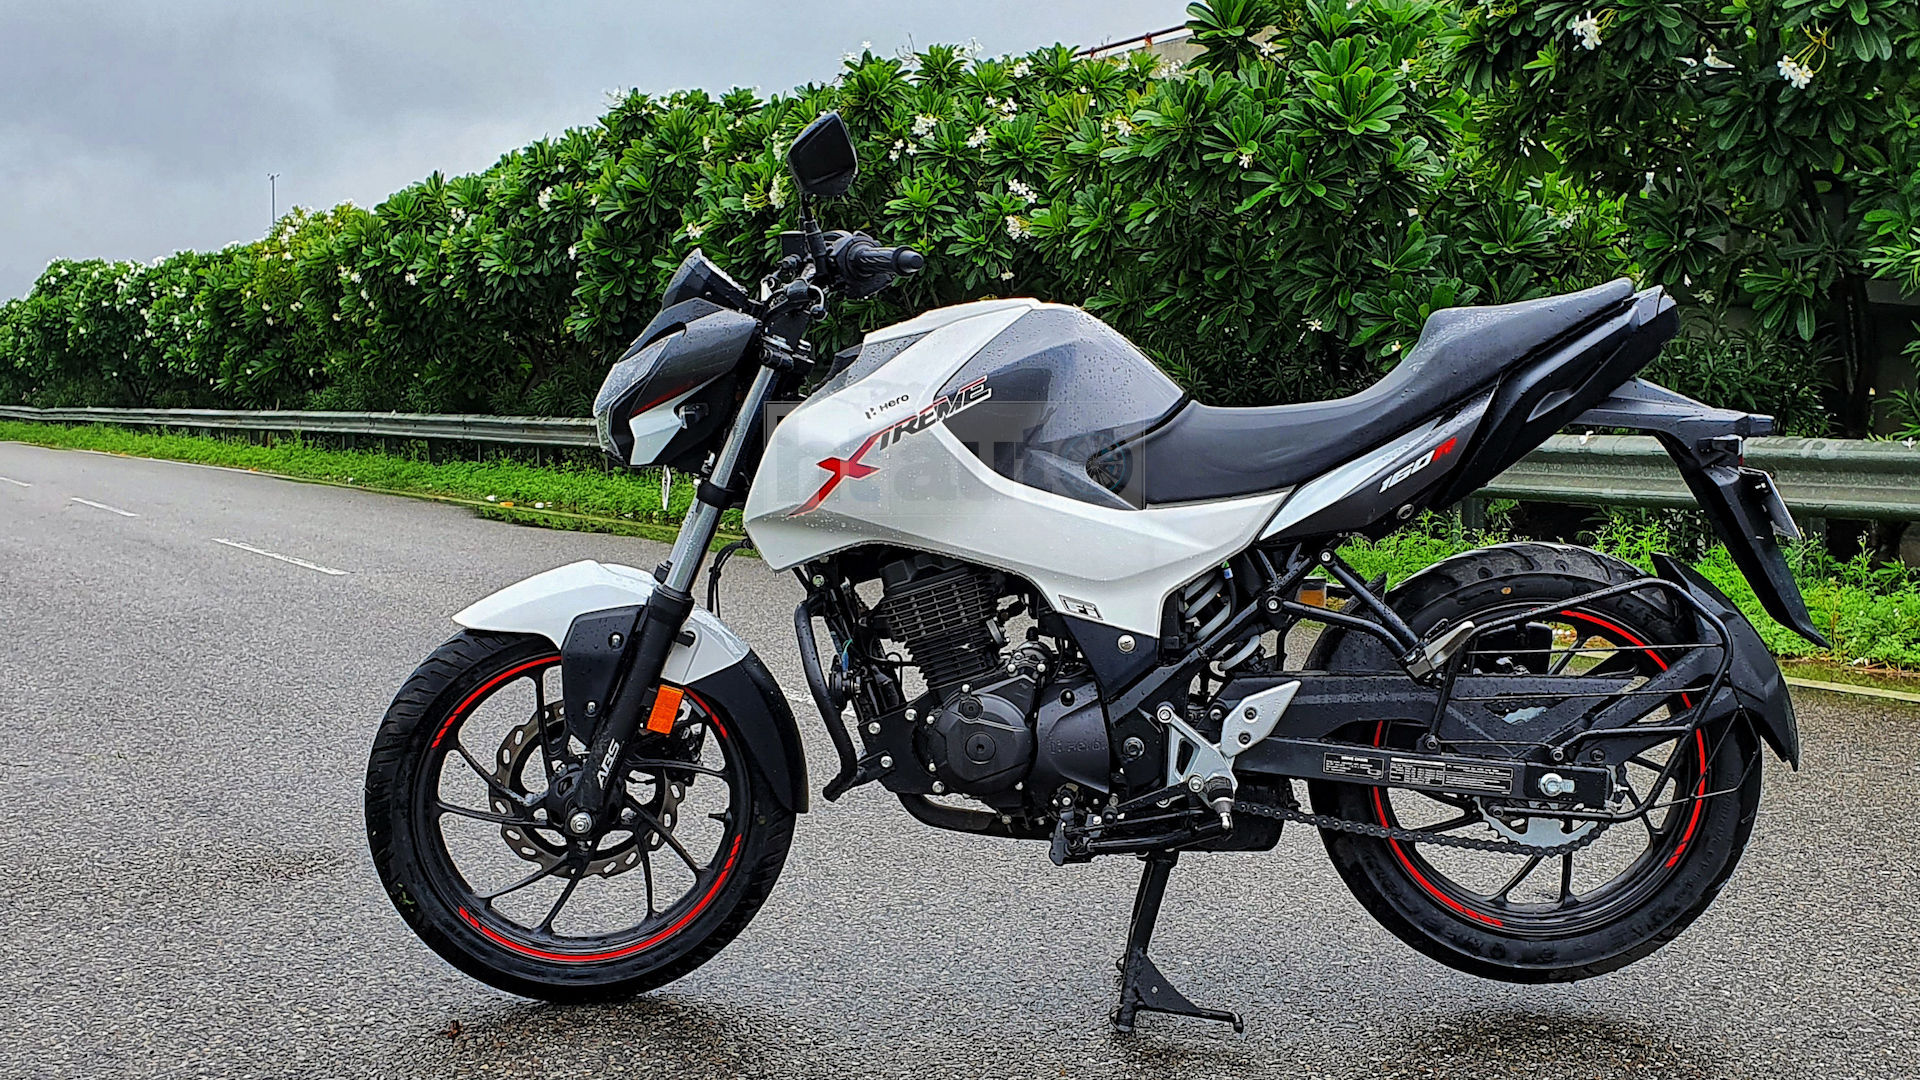 Hero Xtreme 160R is based on the 1.R concept. Picture Courtesy: Sabyasachi Dasgupta